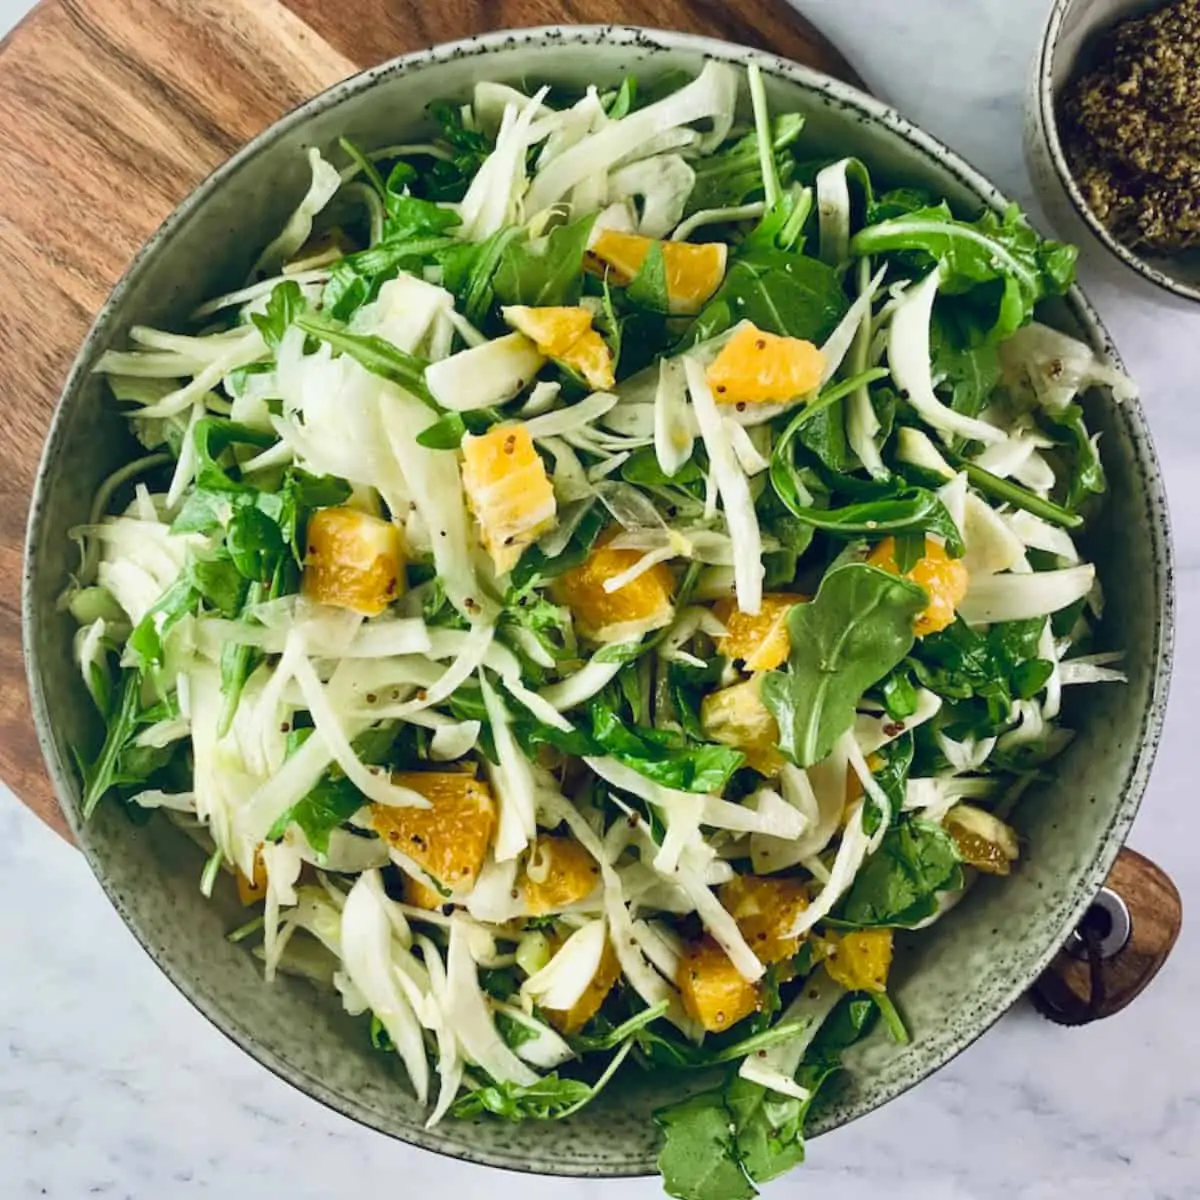 Fennel and Orange Salad in a deep ceramic bowl on a wooden board with mustard in a bowl on top right.